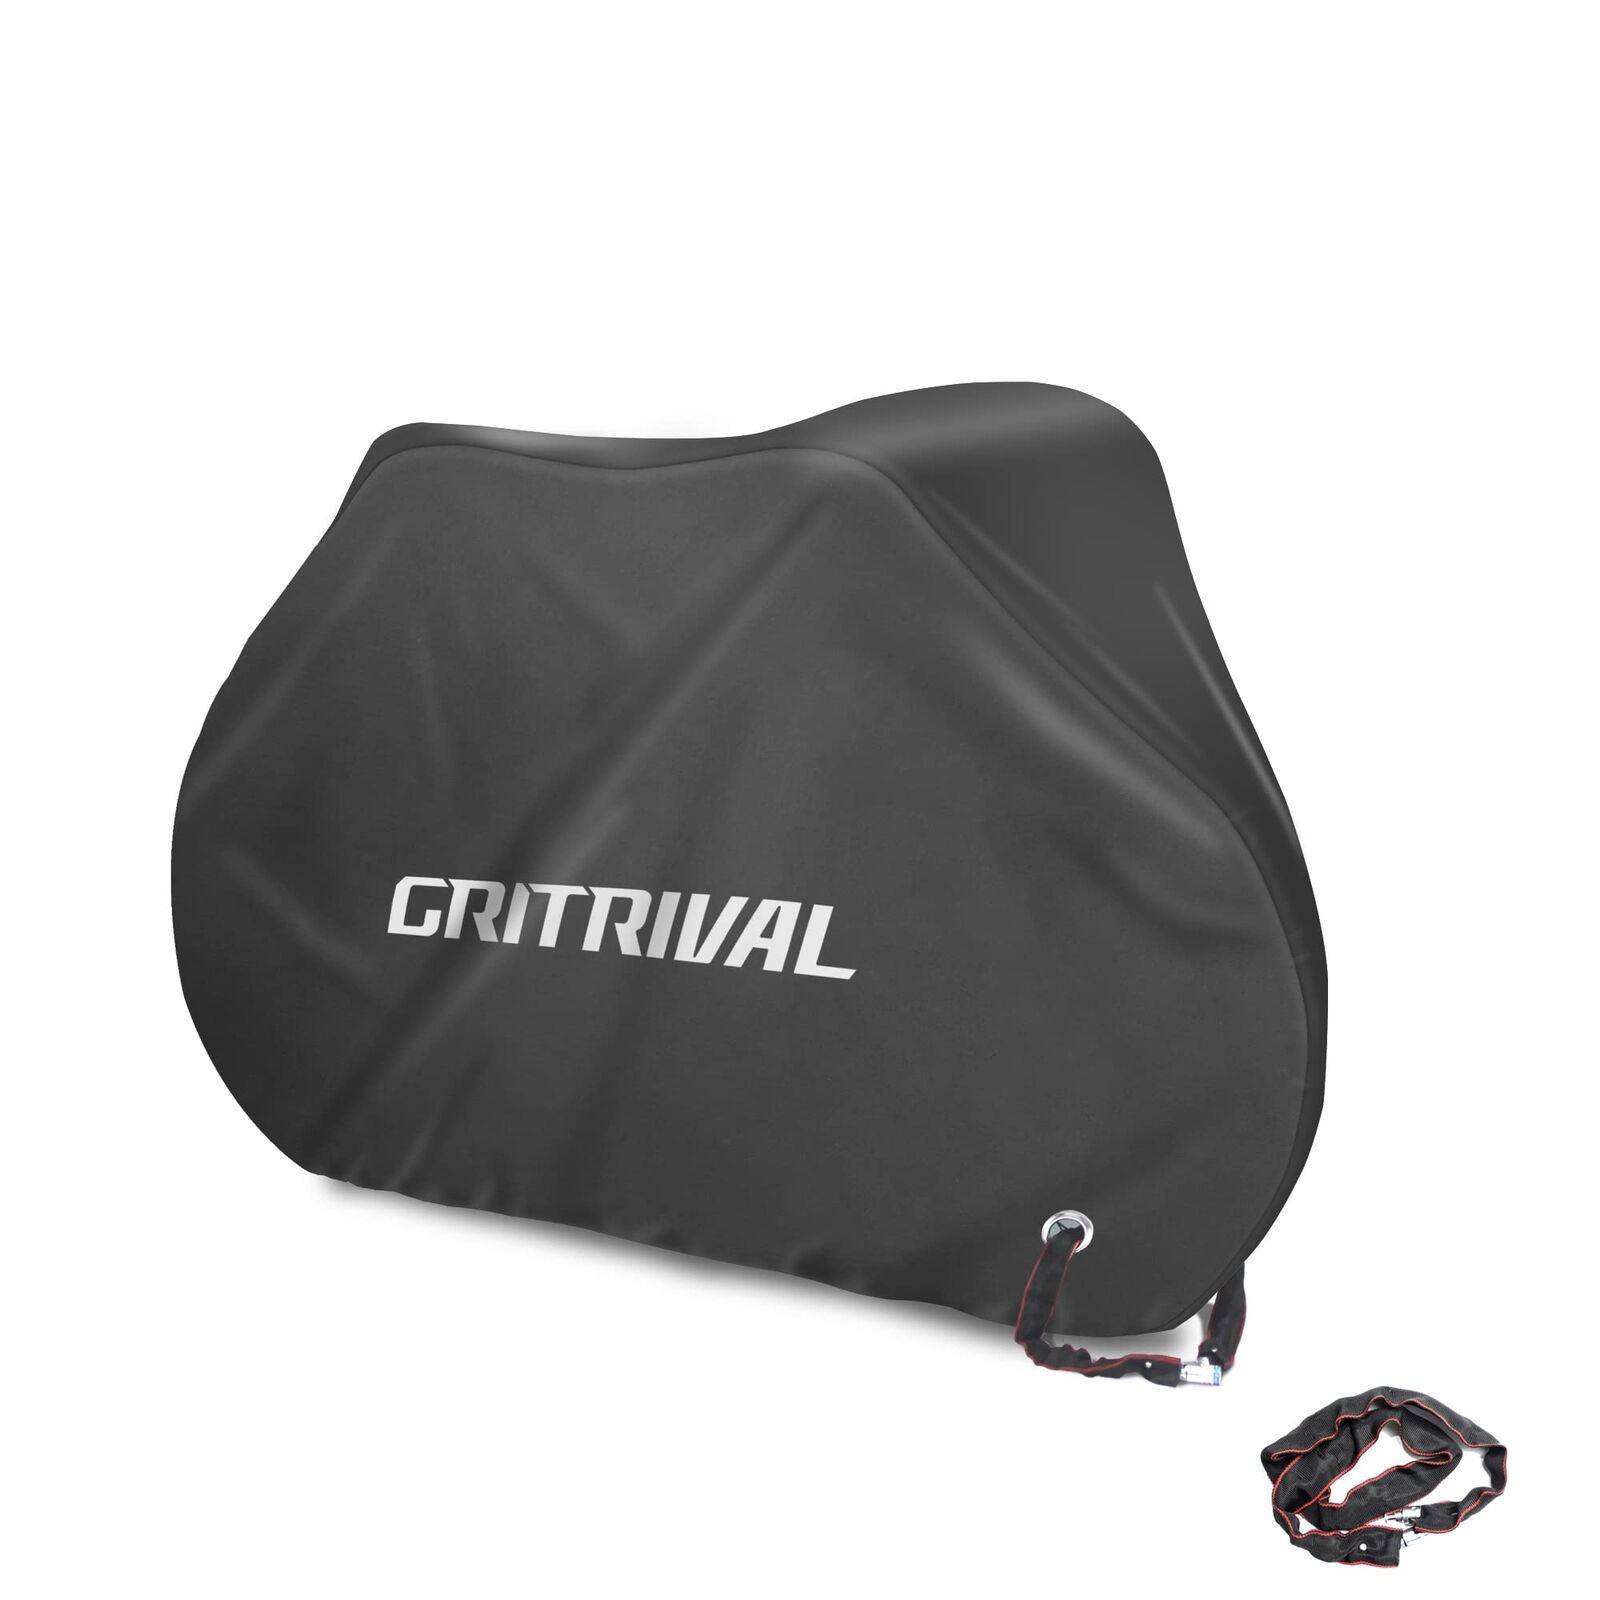 Bike Covers Outdoor Storage Waterproof It has Three Colors and Two Sizes The ...